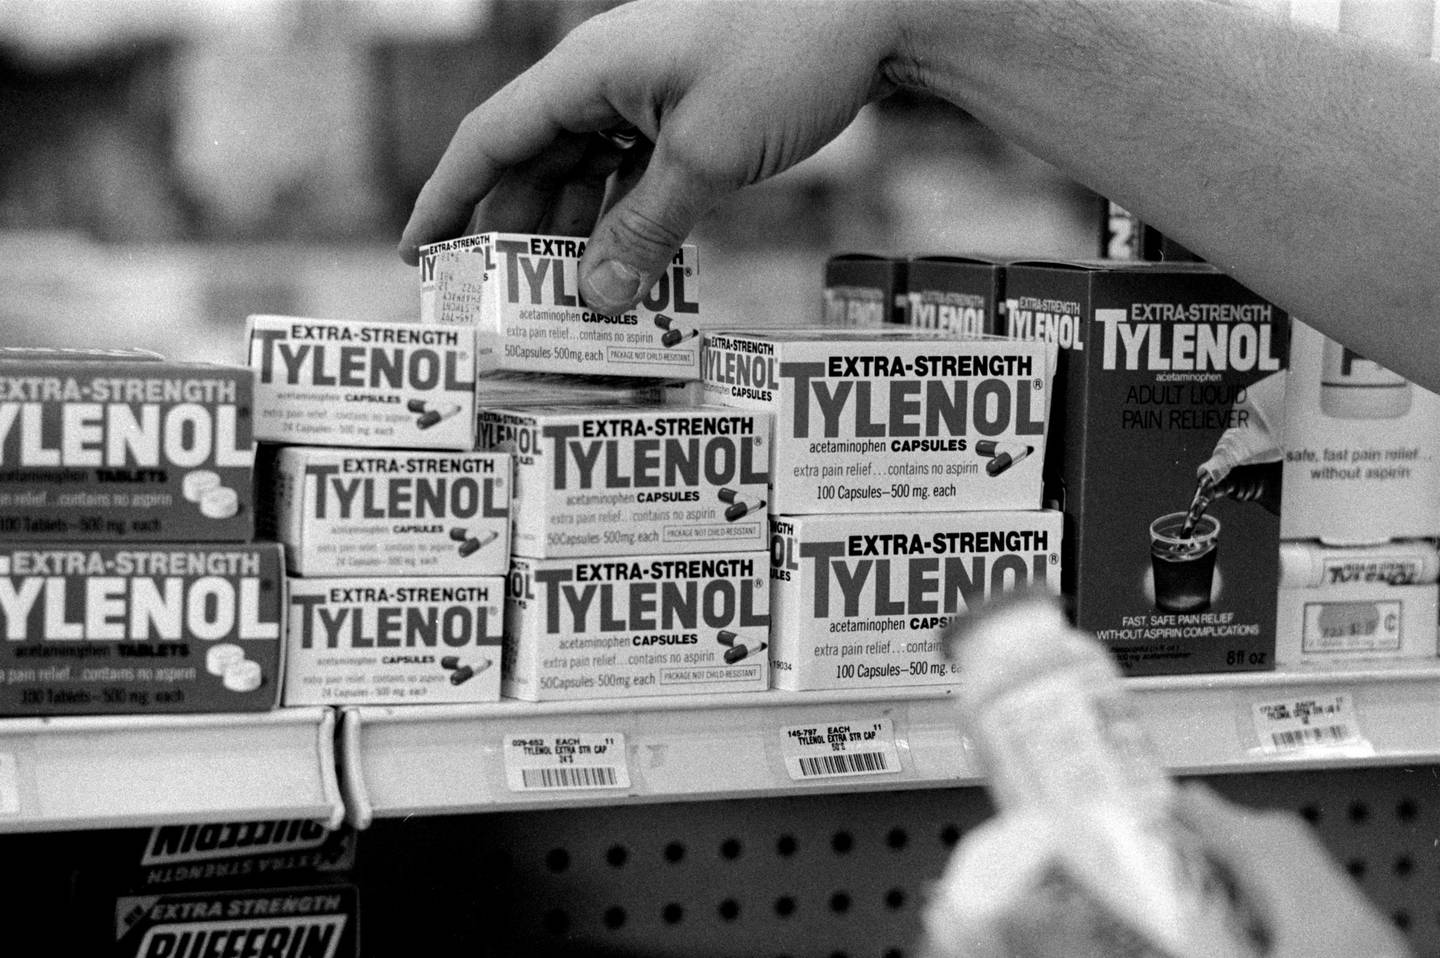 A pharmacist checks lot codes on boxes of Extra-Strength Tylenol. The initial recalls were limited to certain batches of the product.